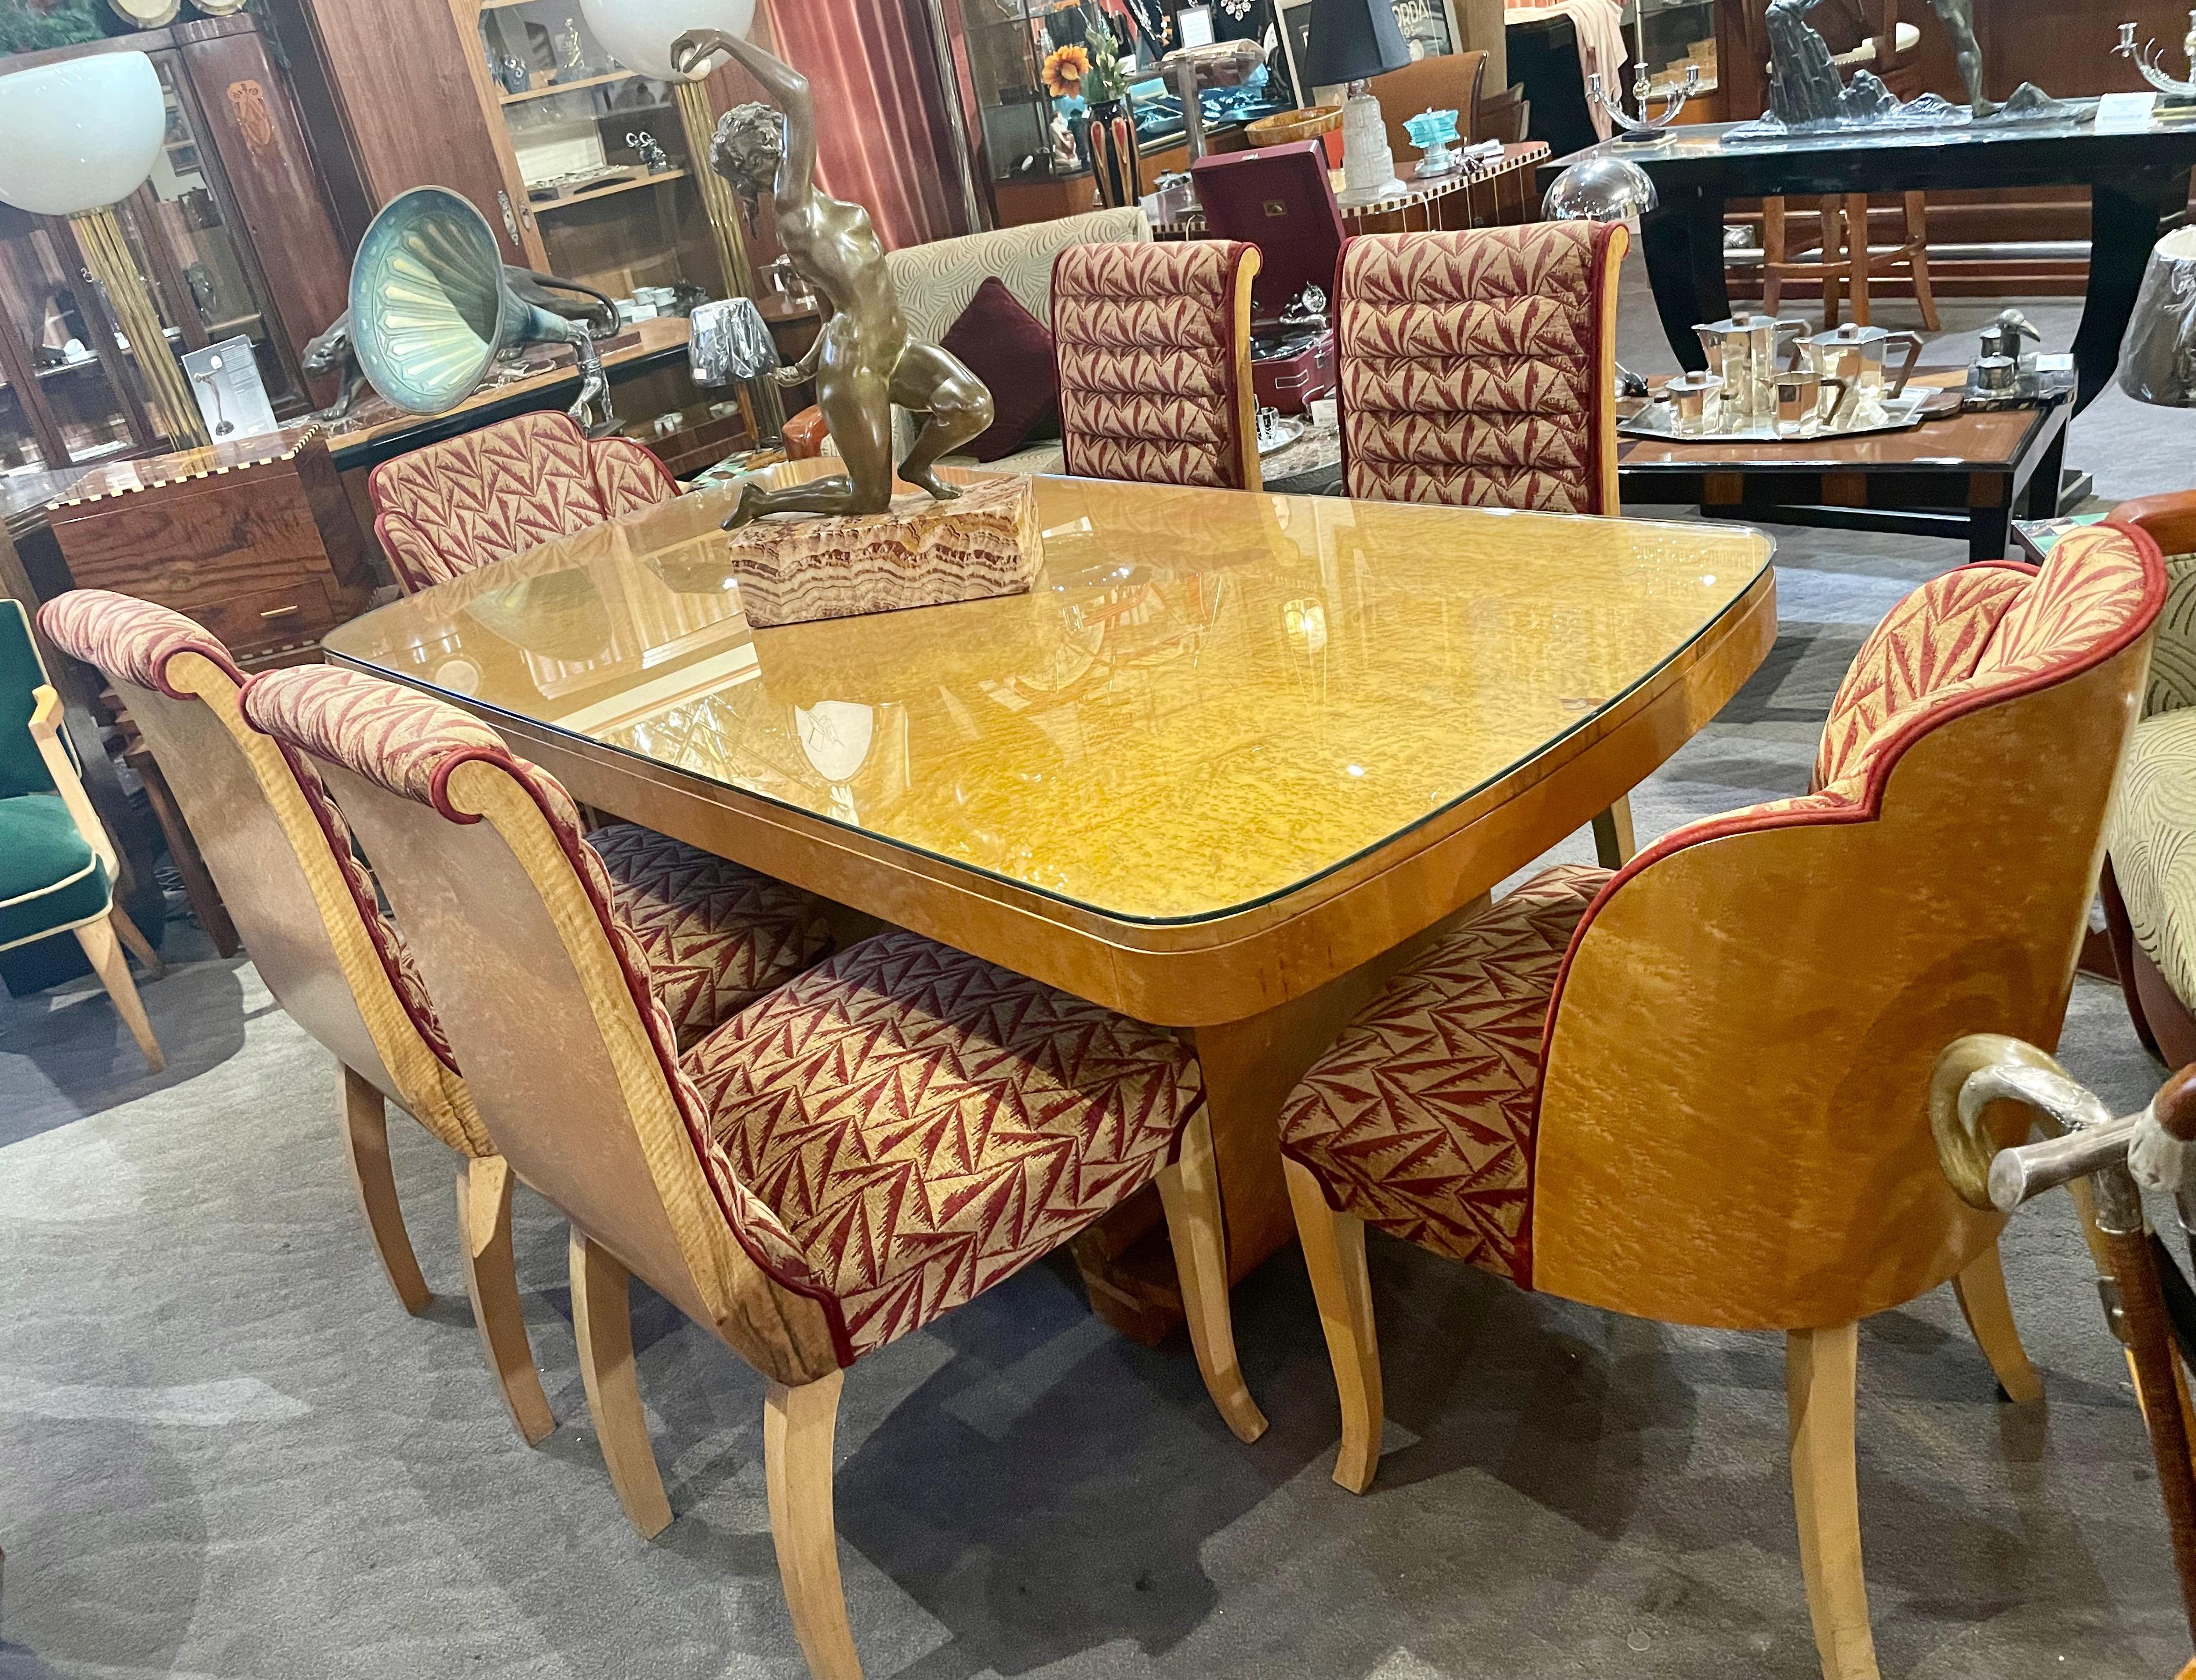 This is all made from stunning burl walnut, the dining table has an original custom glass top. This is in superb condition. The wood has all been re-polished to a very high standard. The chairs have original art deco style upholstery in very good